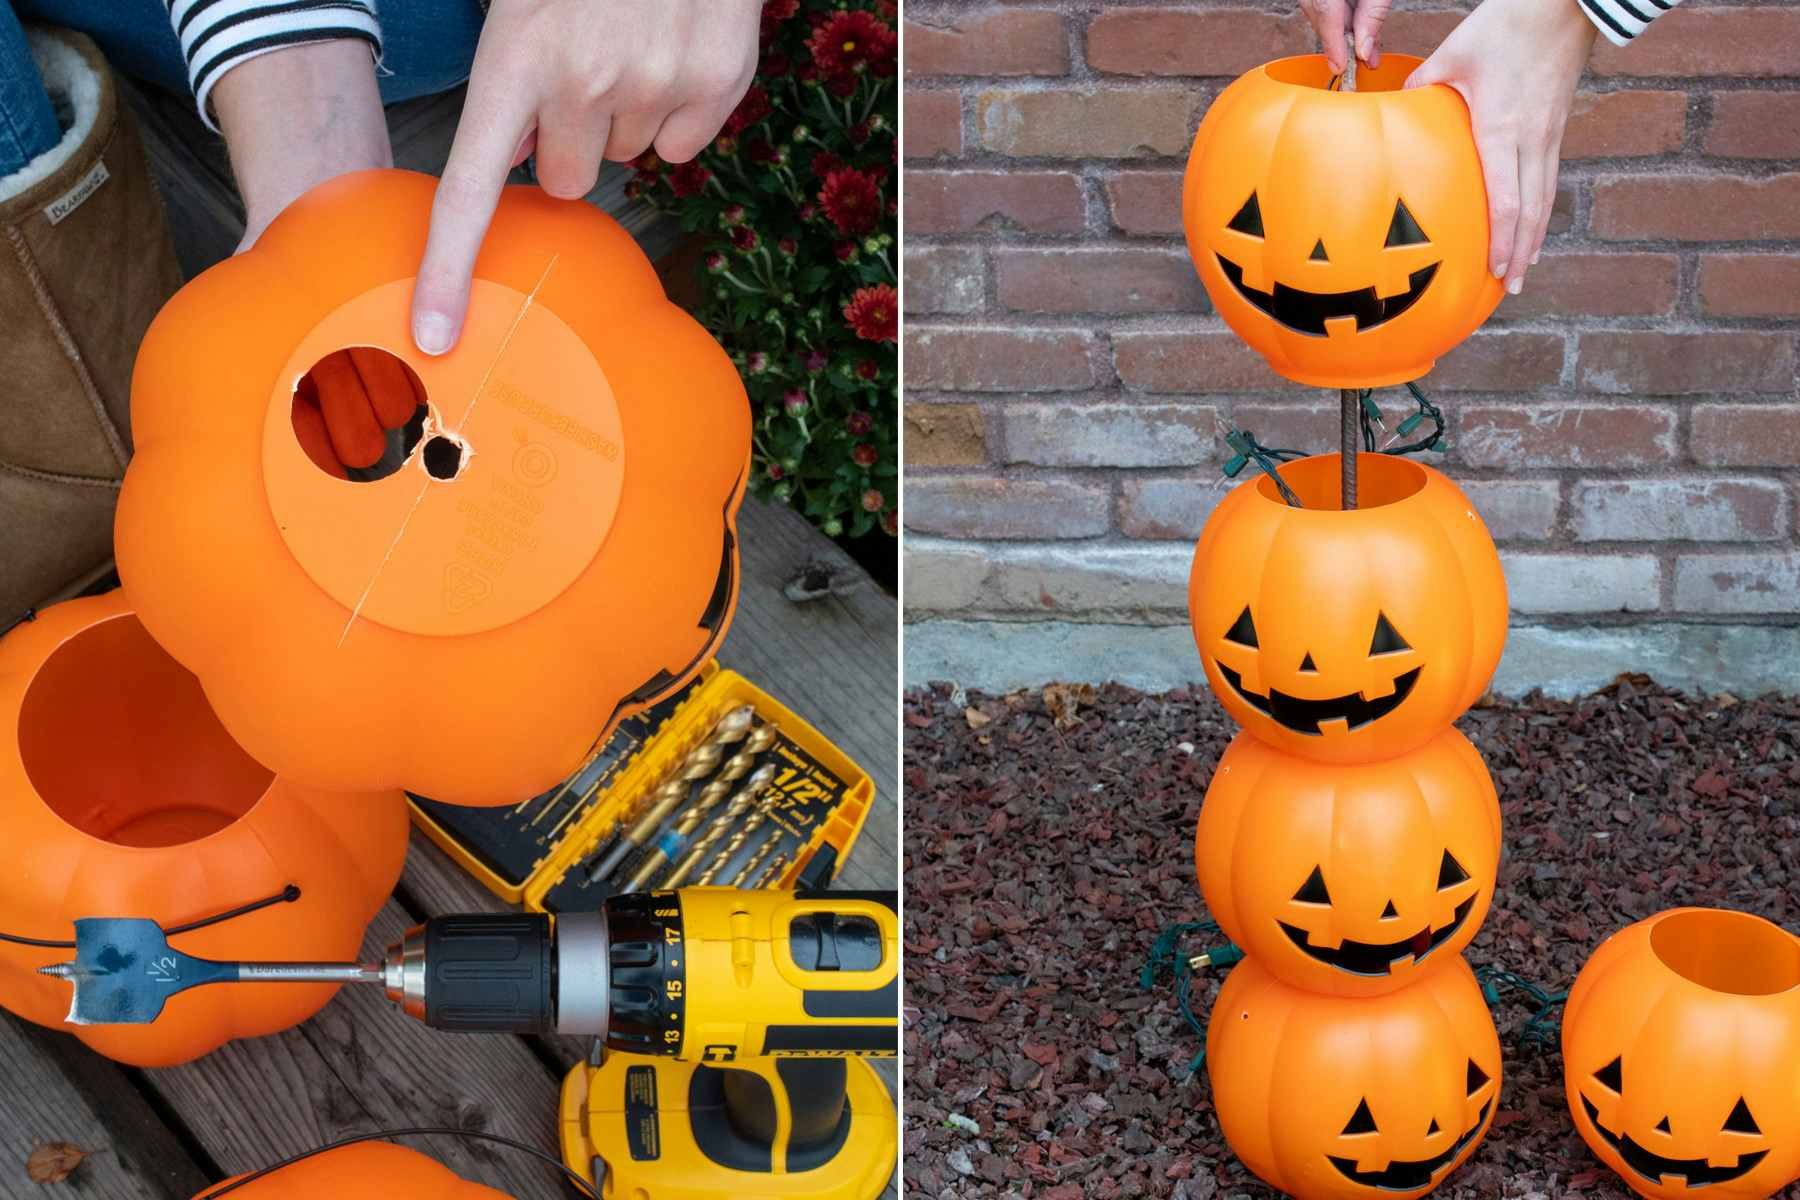 A person pointing to the holes drilled into the bottom of a plastic trick-or-treat pumpkin pail, and someone stacking multiple pails on a metal rod sticking out of the ground.